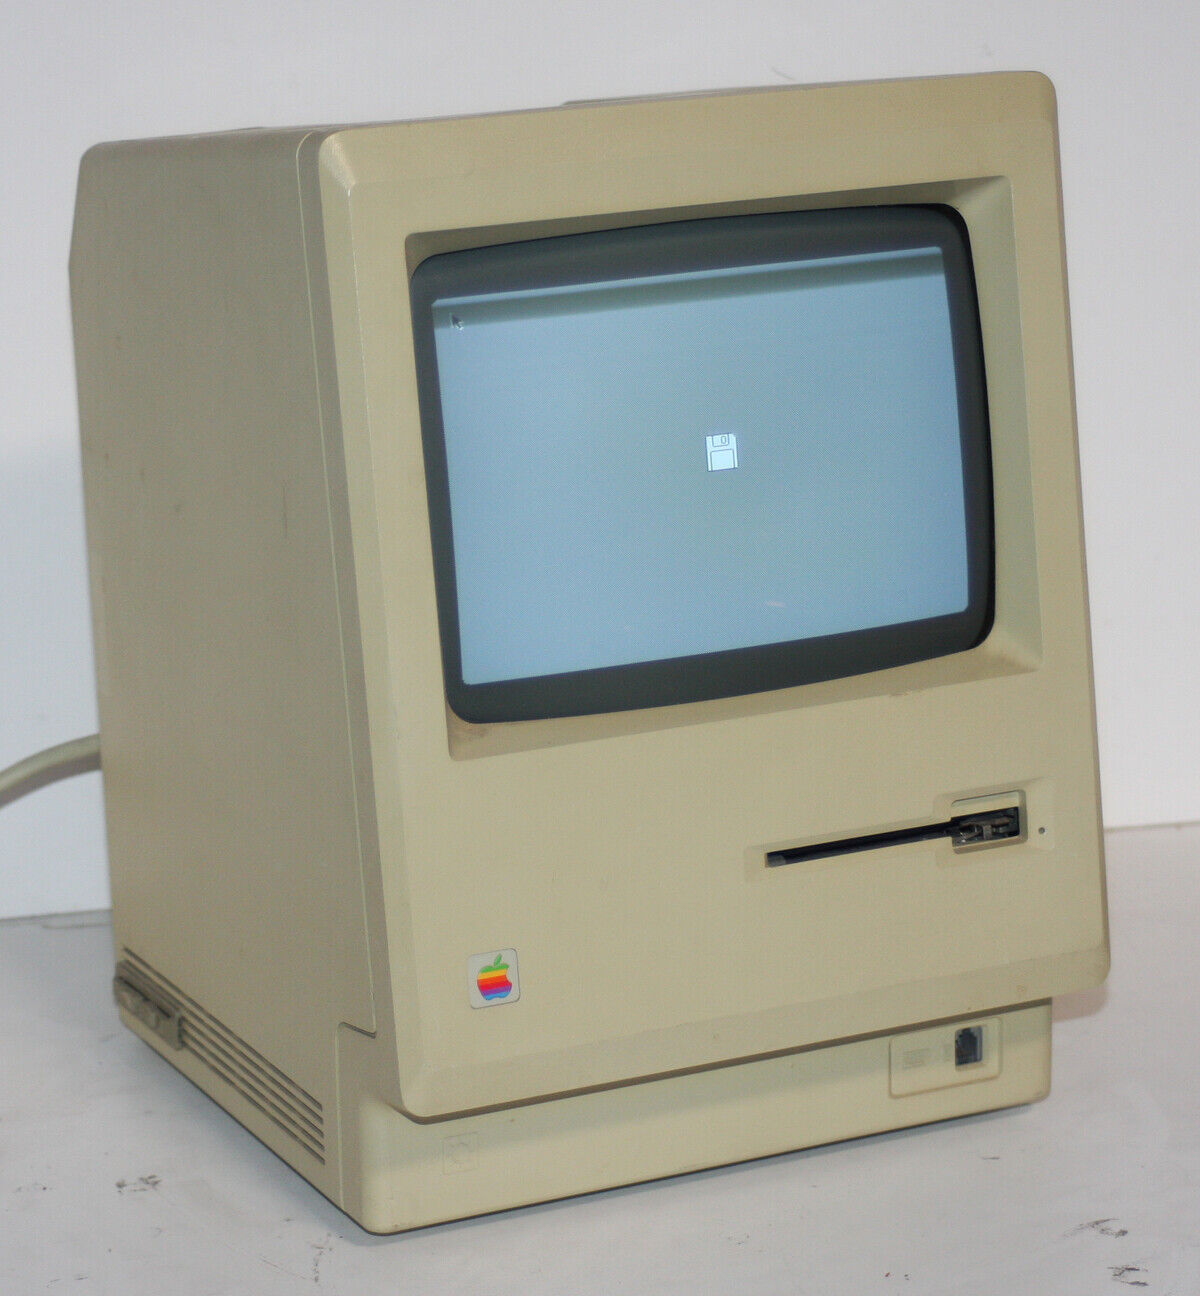 VINTAGE APPLE MACINTOSH 512K COMPUTER  CASE GOOD BOOTS TO DISC SOLD AS IS READ